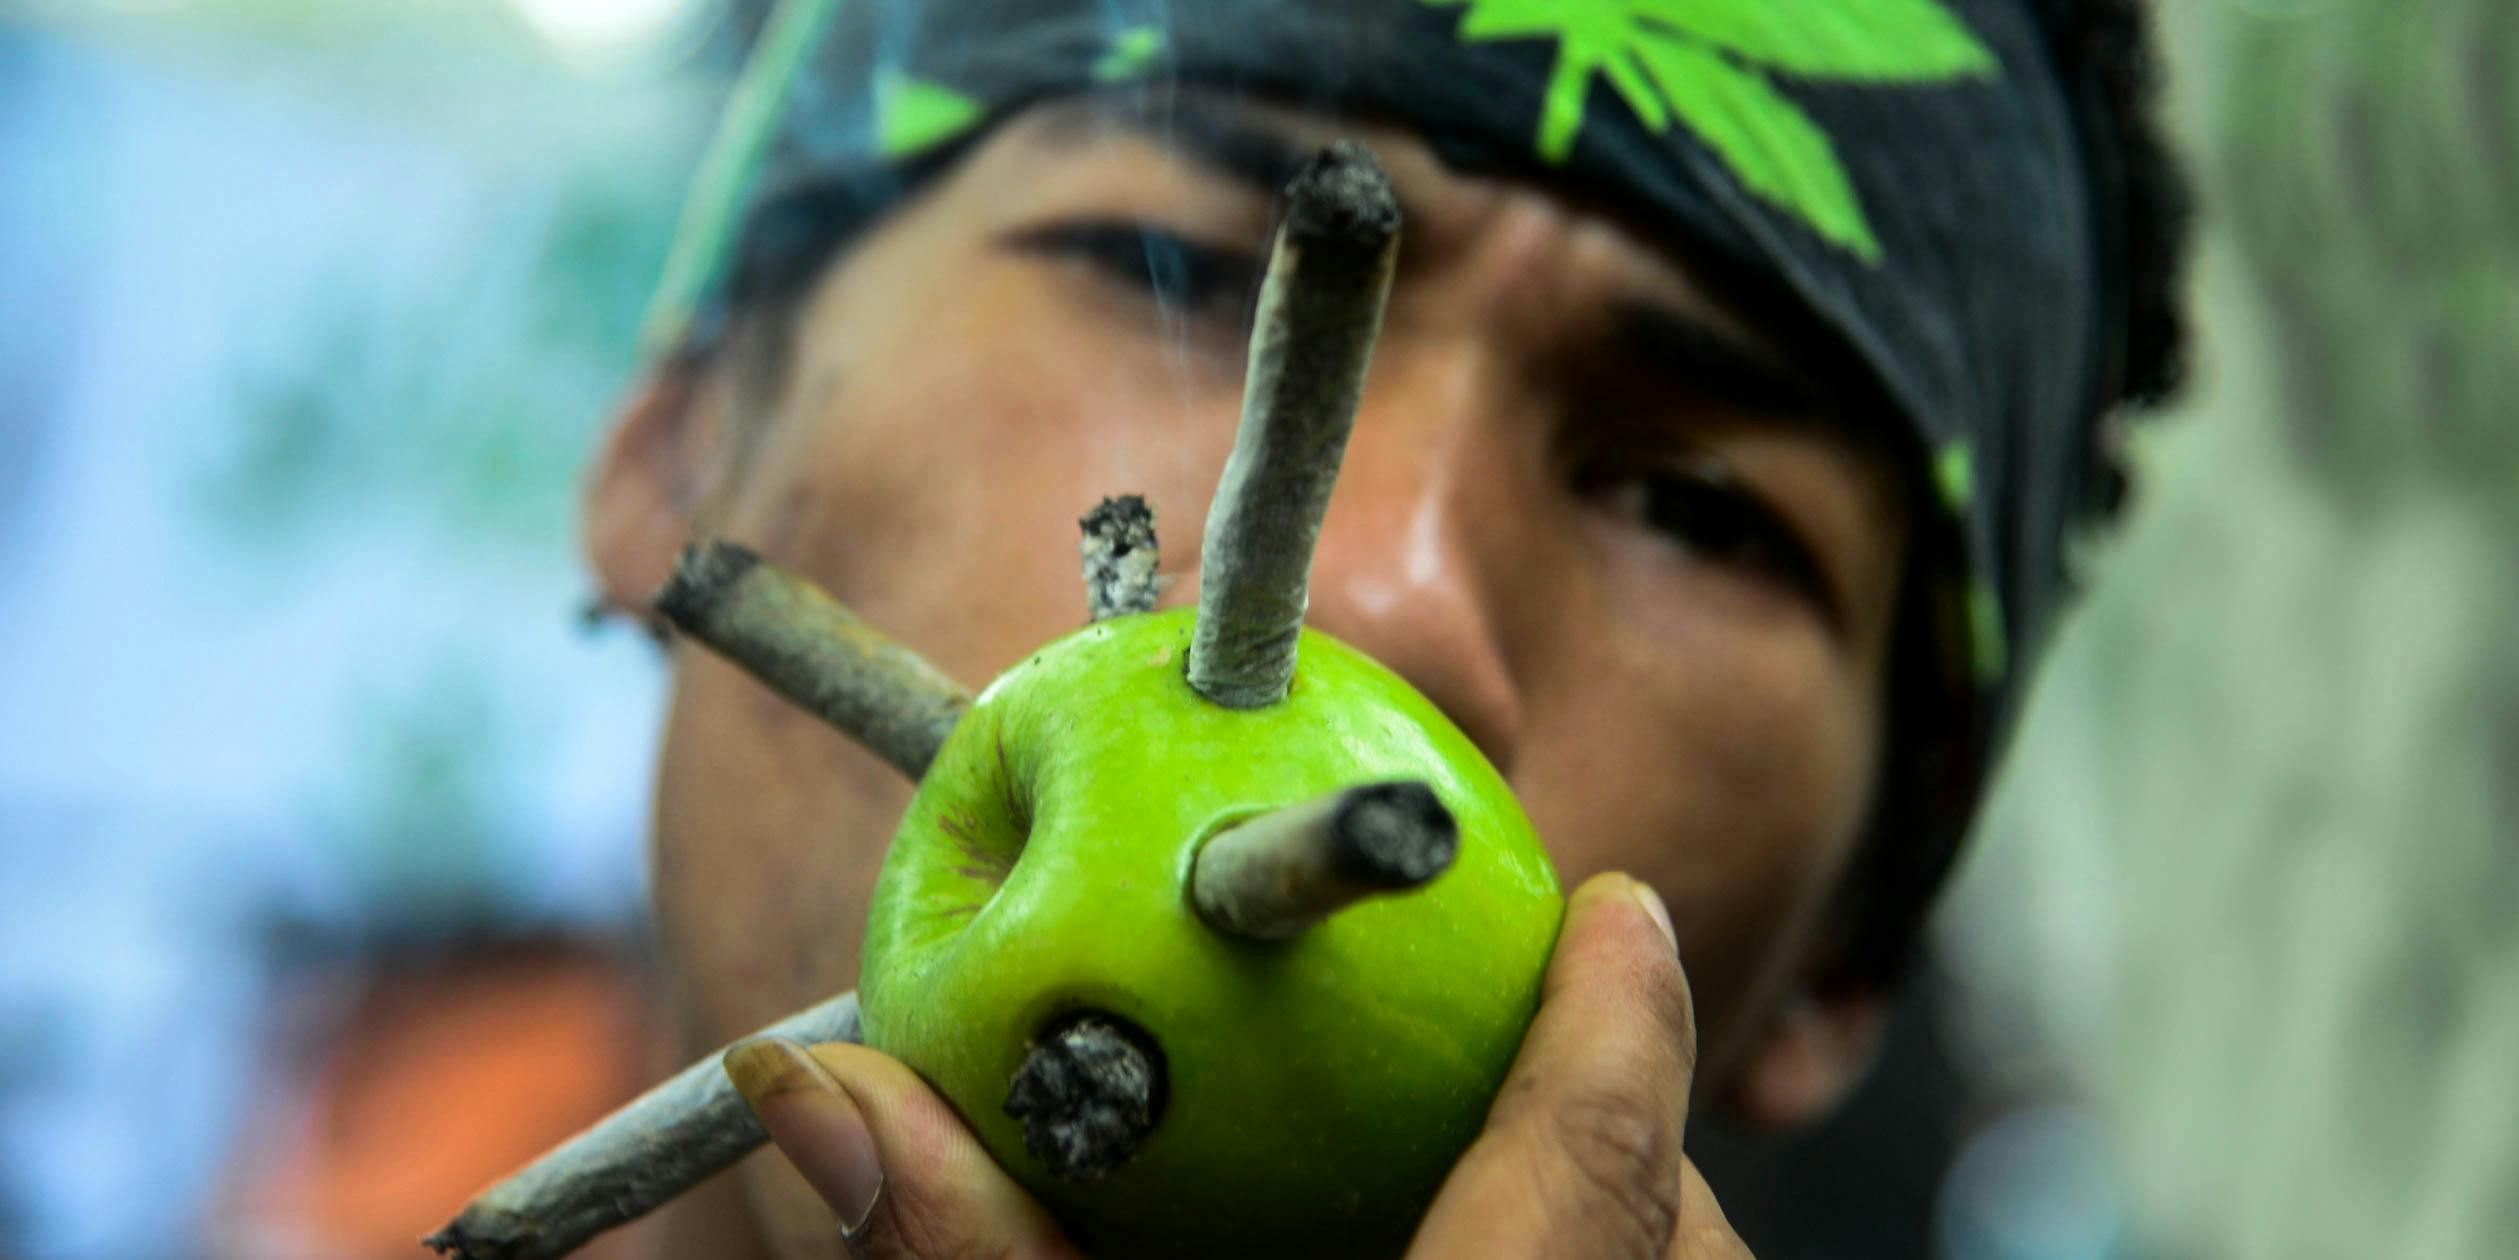 Most DIY Bongs Are Made From Apples And Bottles, Says Survey